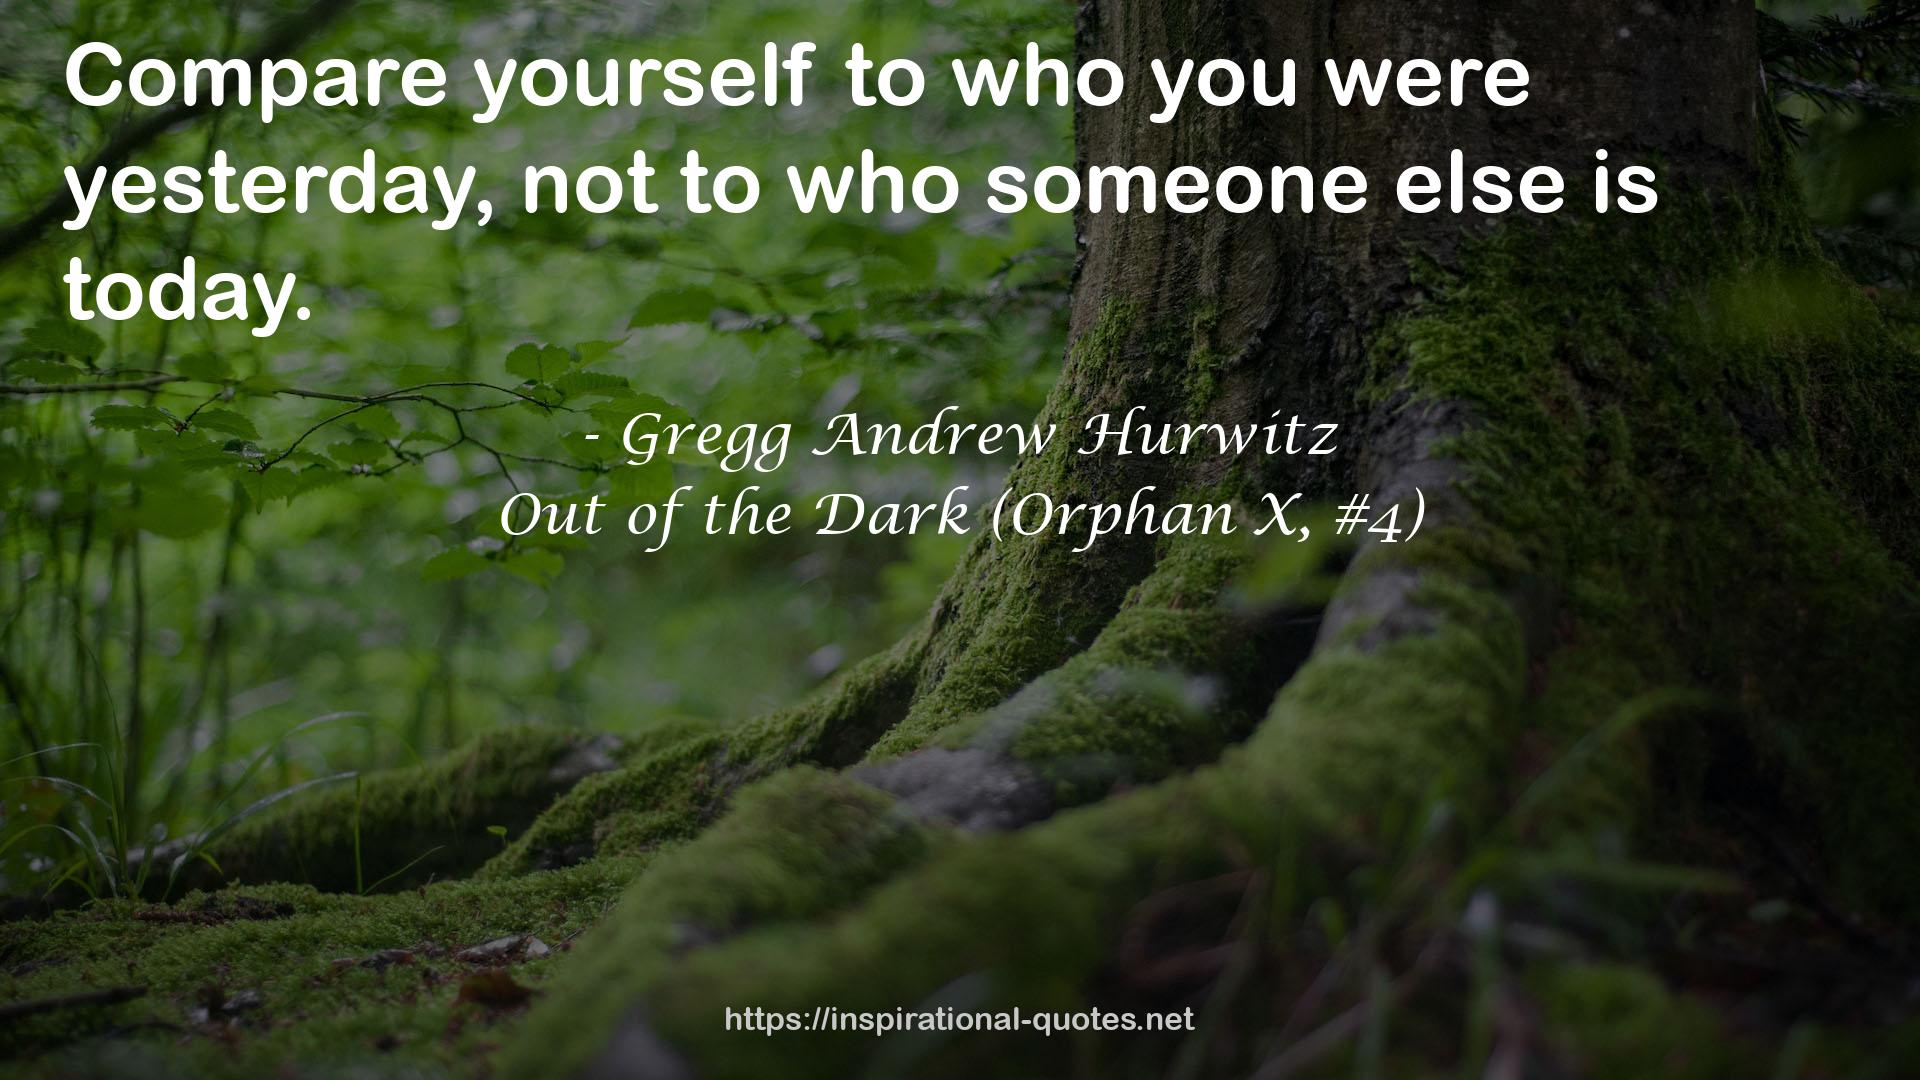 Out of the Dark (Orphan X, #4) QUOTES